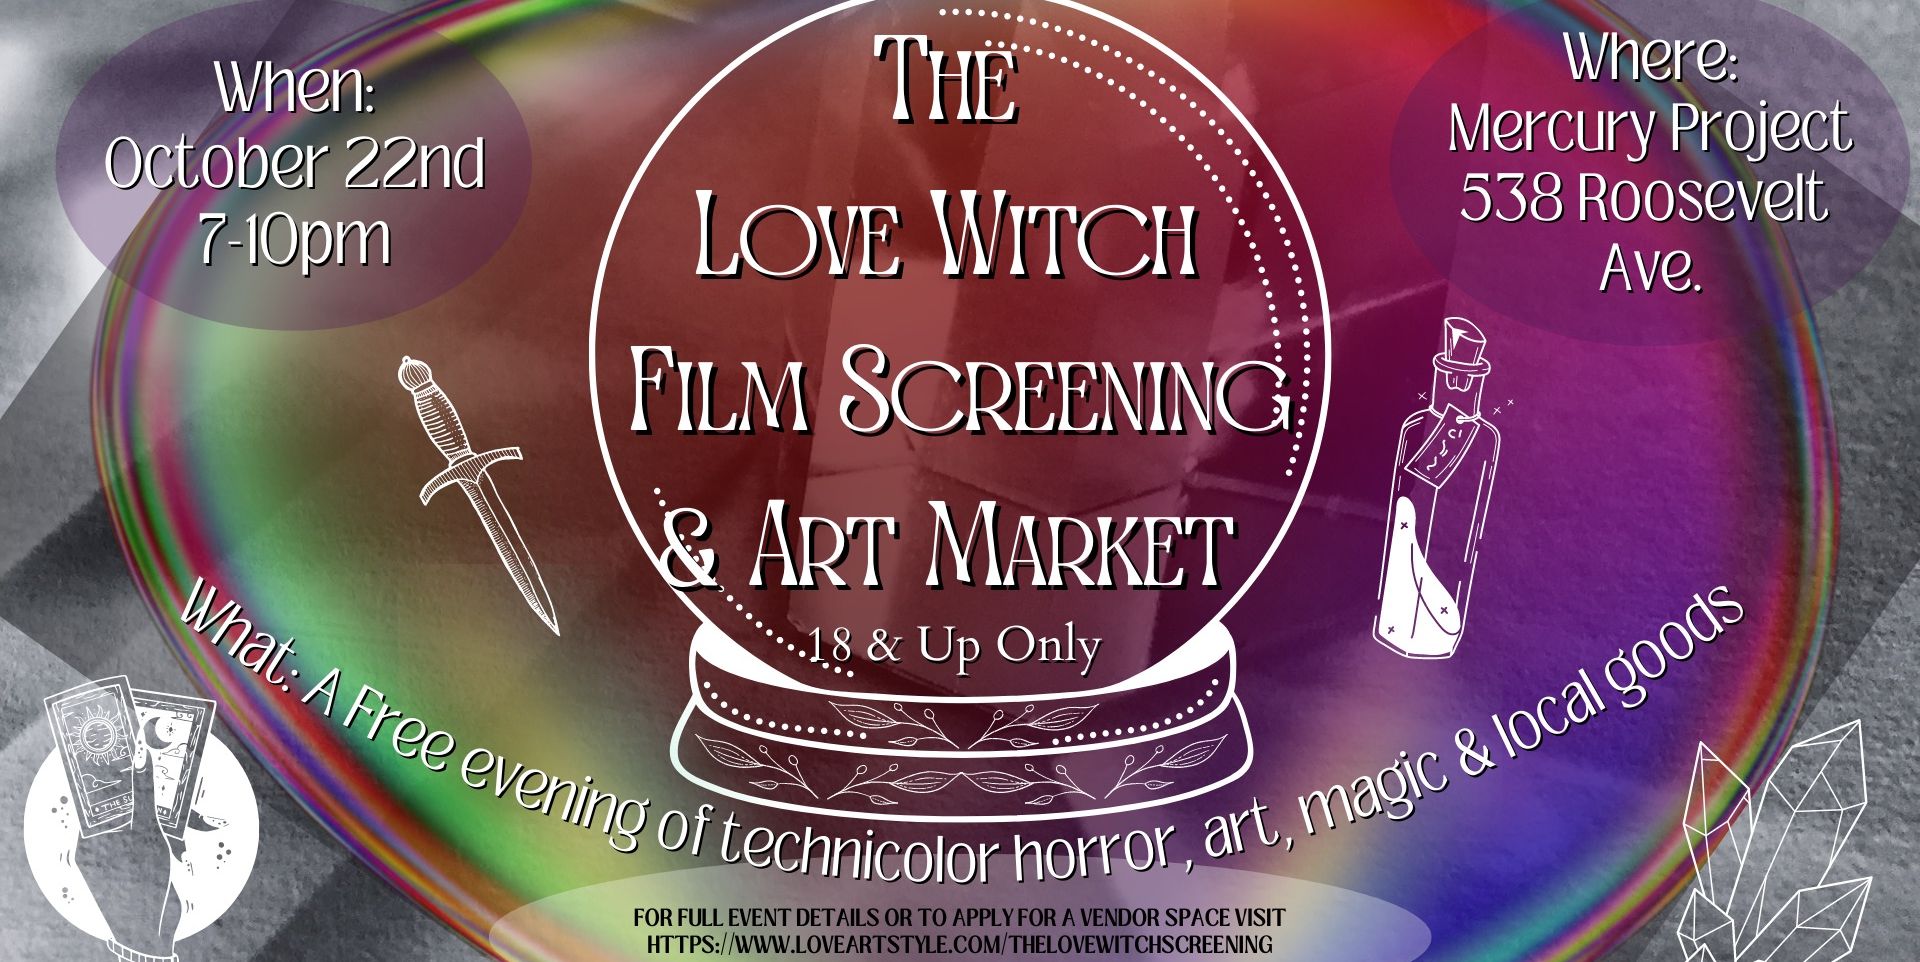 The Love Witch Film Screening & Art Market promotional image